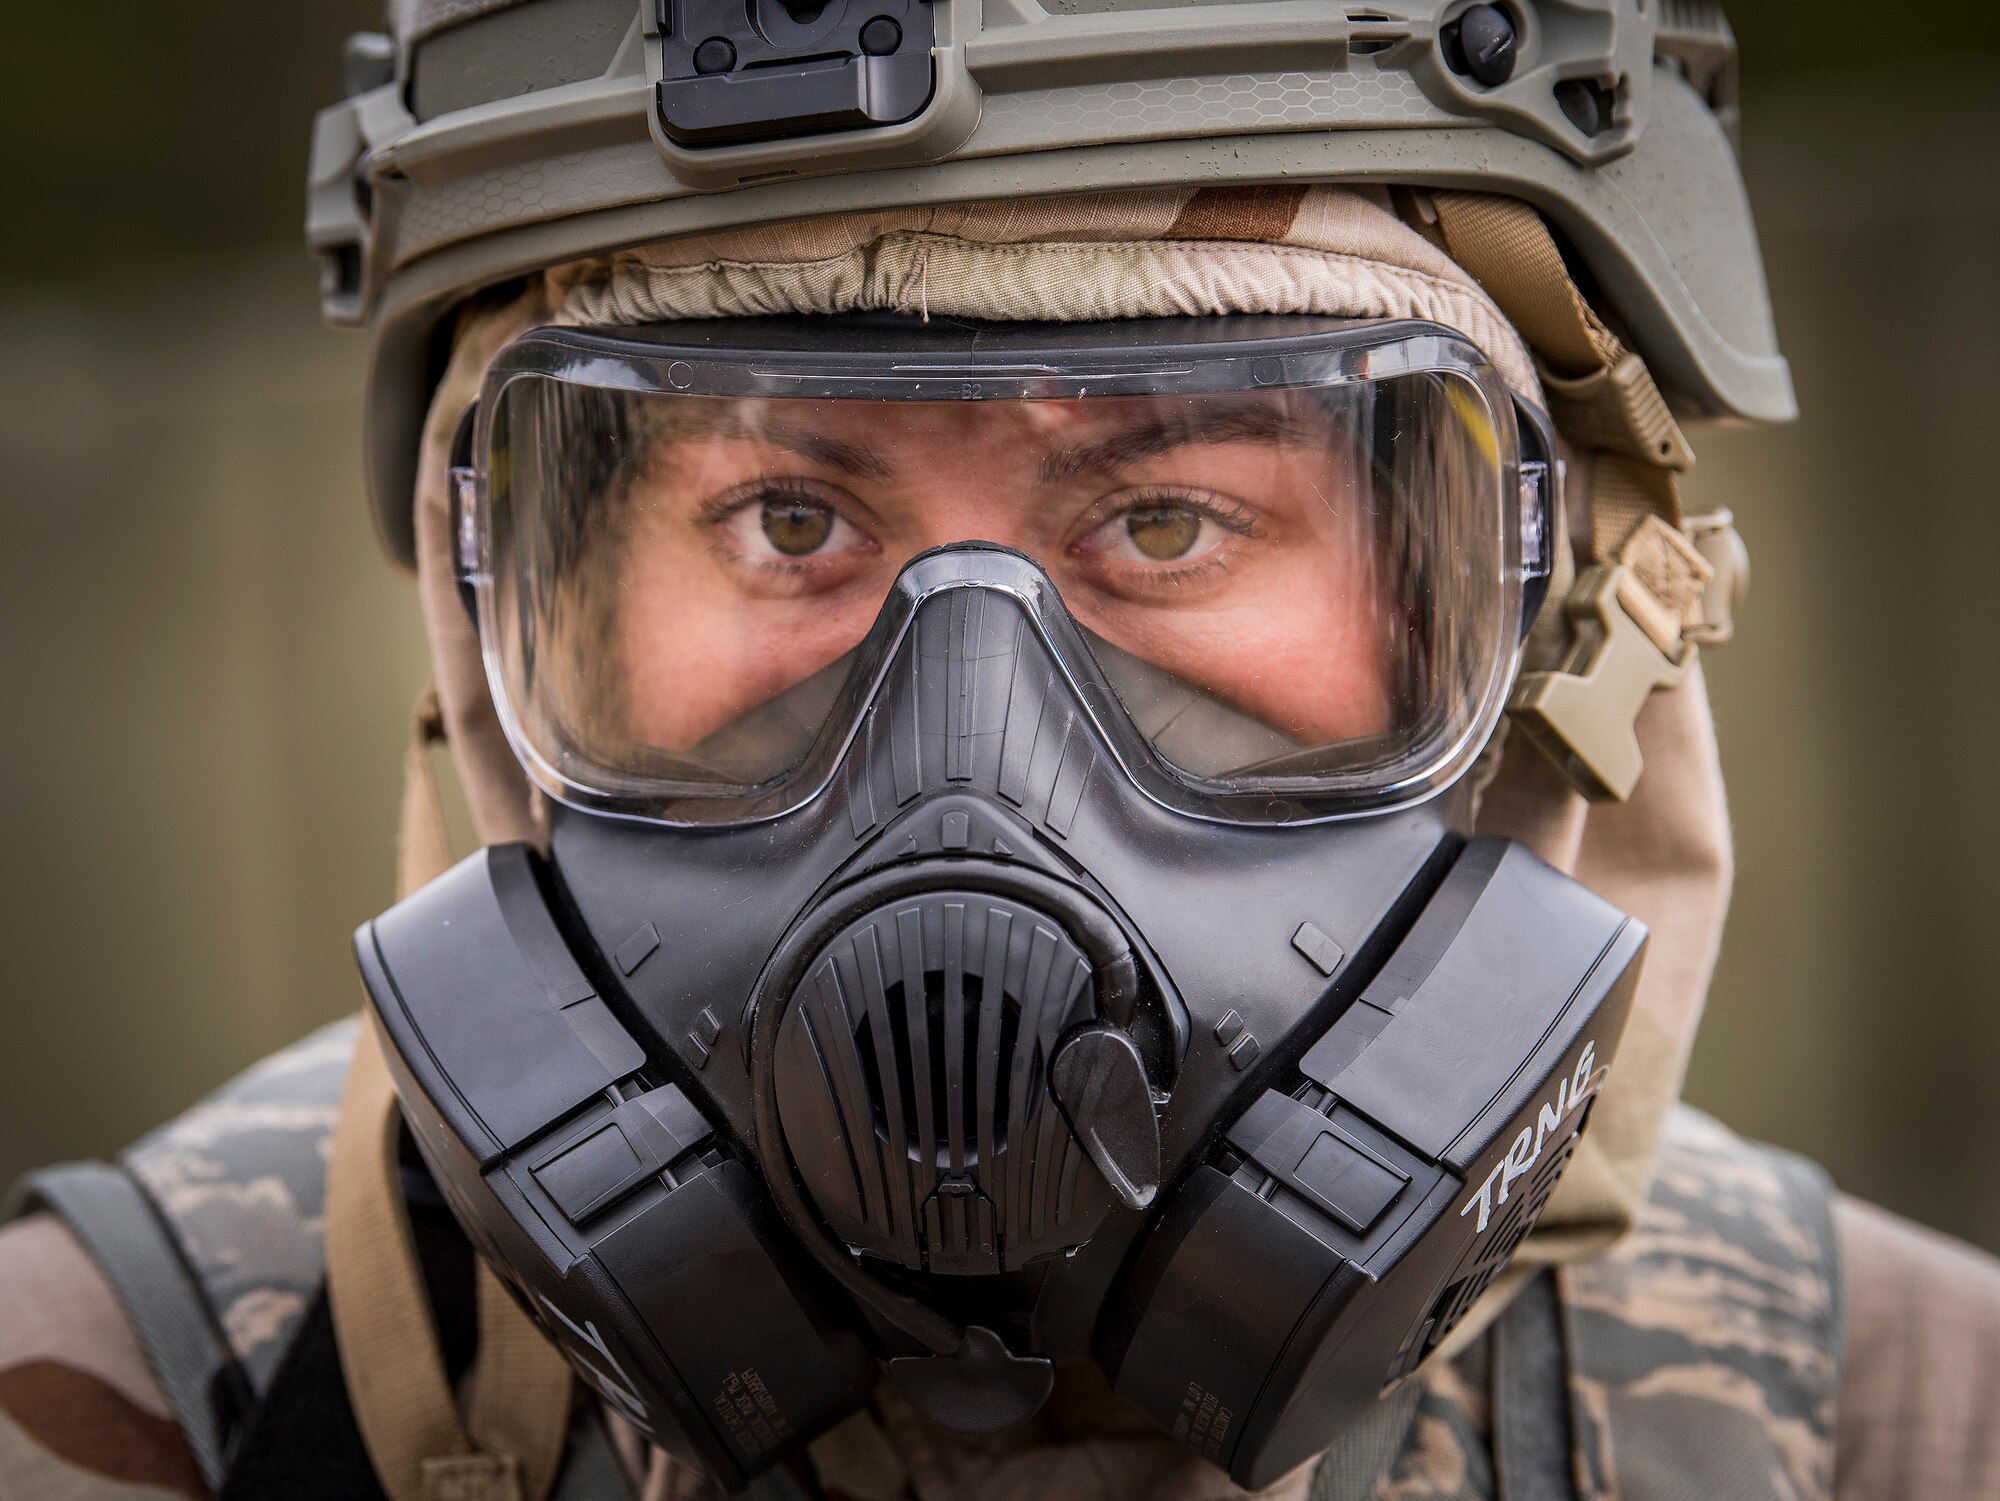 Airman Amanda Danforth, 96th Security Forces Squadron, watches the horizon during an alarm phase of a chemical, biological, radiological, nuclear and explosive training exercise at Eglin Air Force Base, Fla., Feb. 1, 2018. (U.S. Air Force photo by Samuel King Jr.)